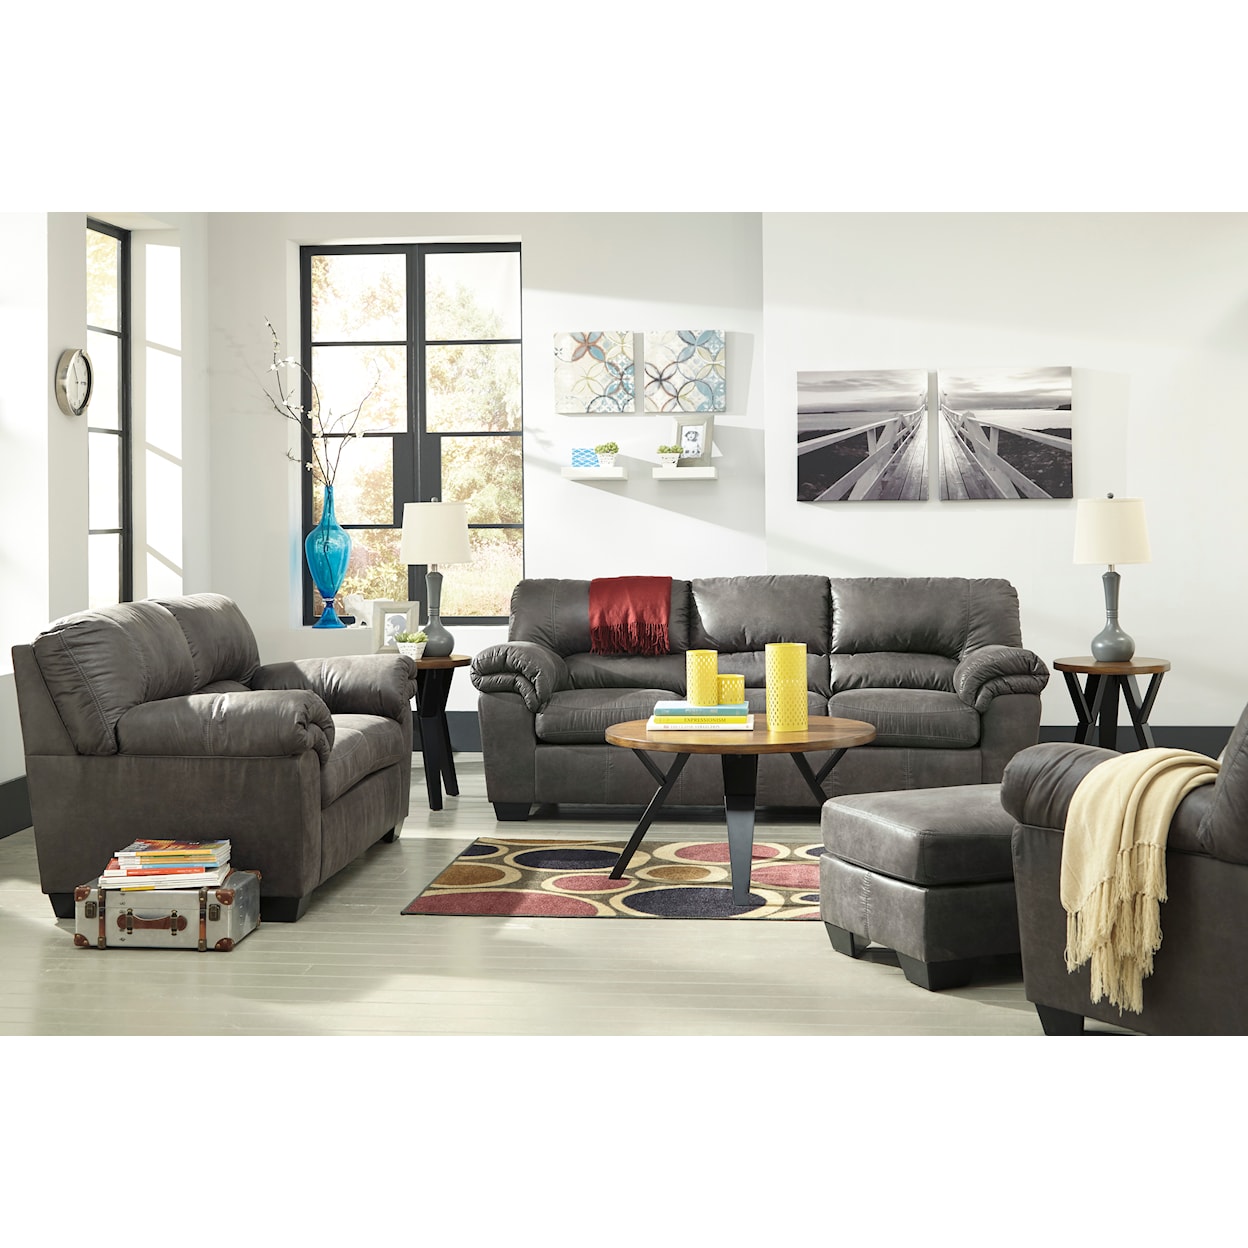 Signature Design by Ashley Bladen Sofa, Loveseat, Chair, and Ottoman